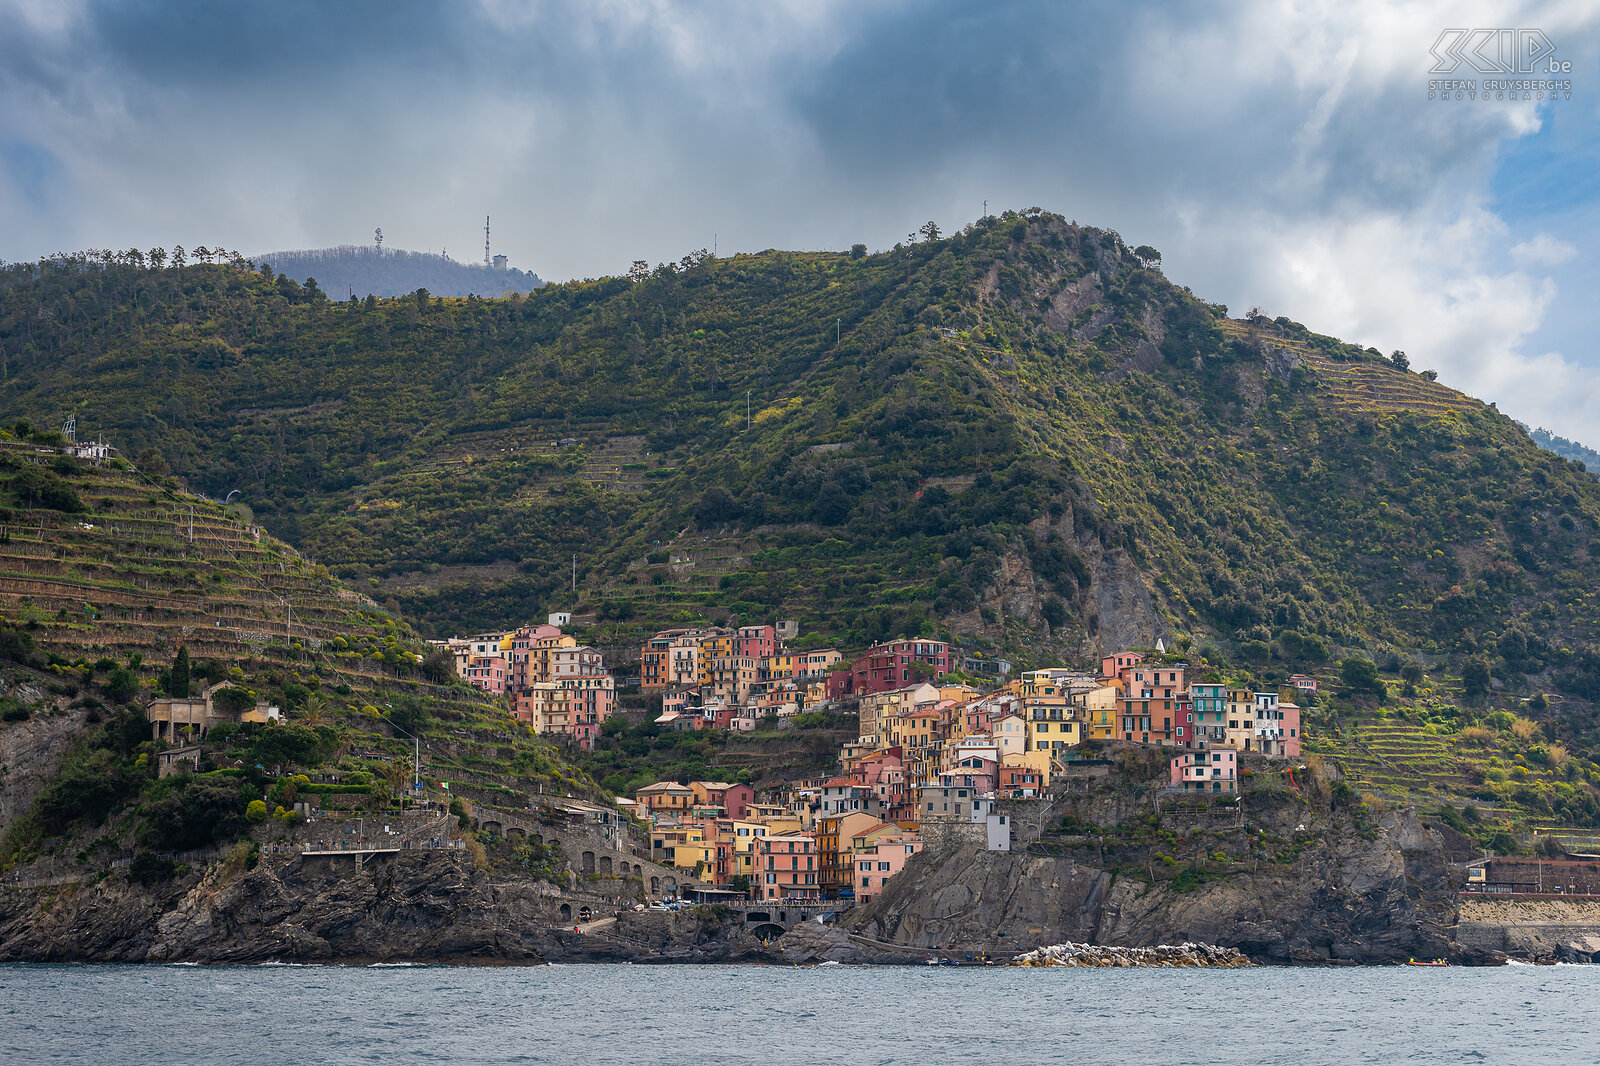 Manarola seen from sea Manarola is built on a high rock 70 meters above sea level. This beautiful village of Cinque Terre has a small harbor with a boat ramp, narrow streets with picturesque multi-colored houses overlooking the sea and many fish restaurants. Stefan Cruysberghs